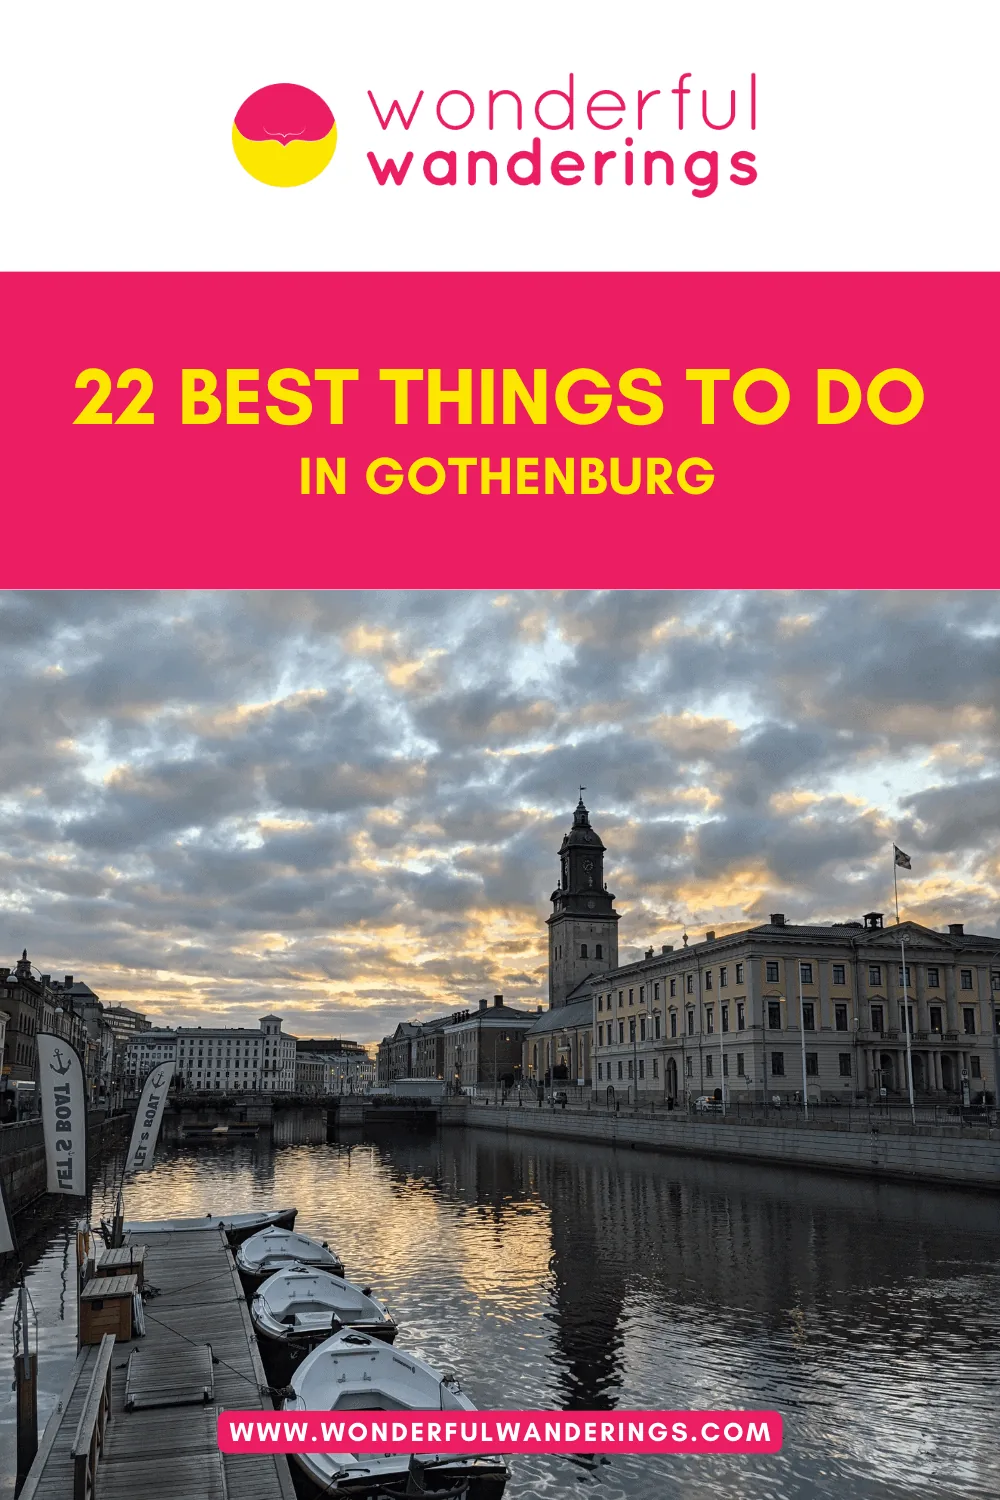 Gothenburg Best things to do